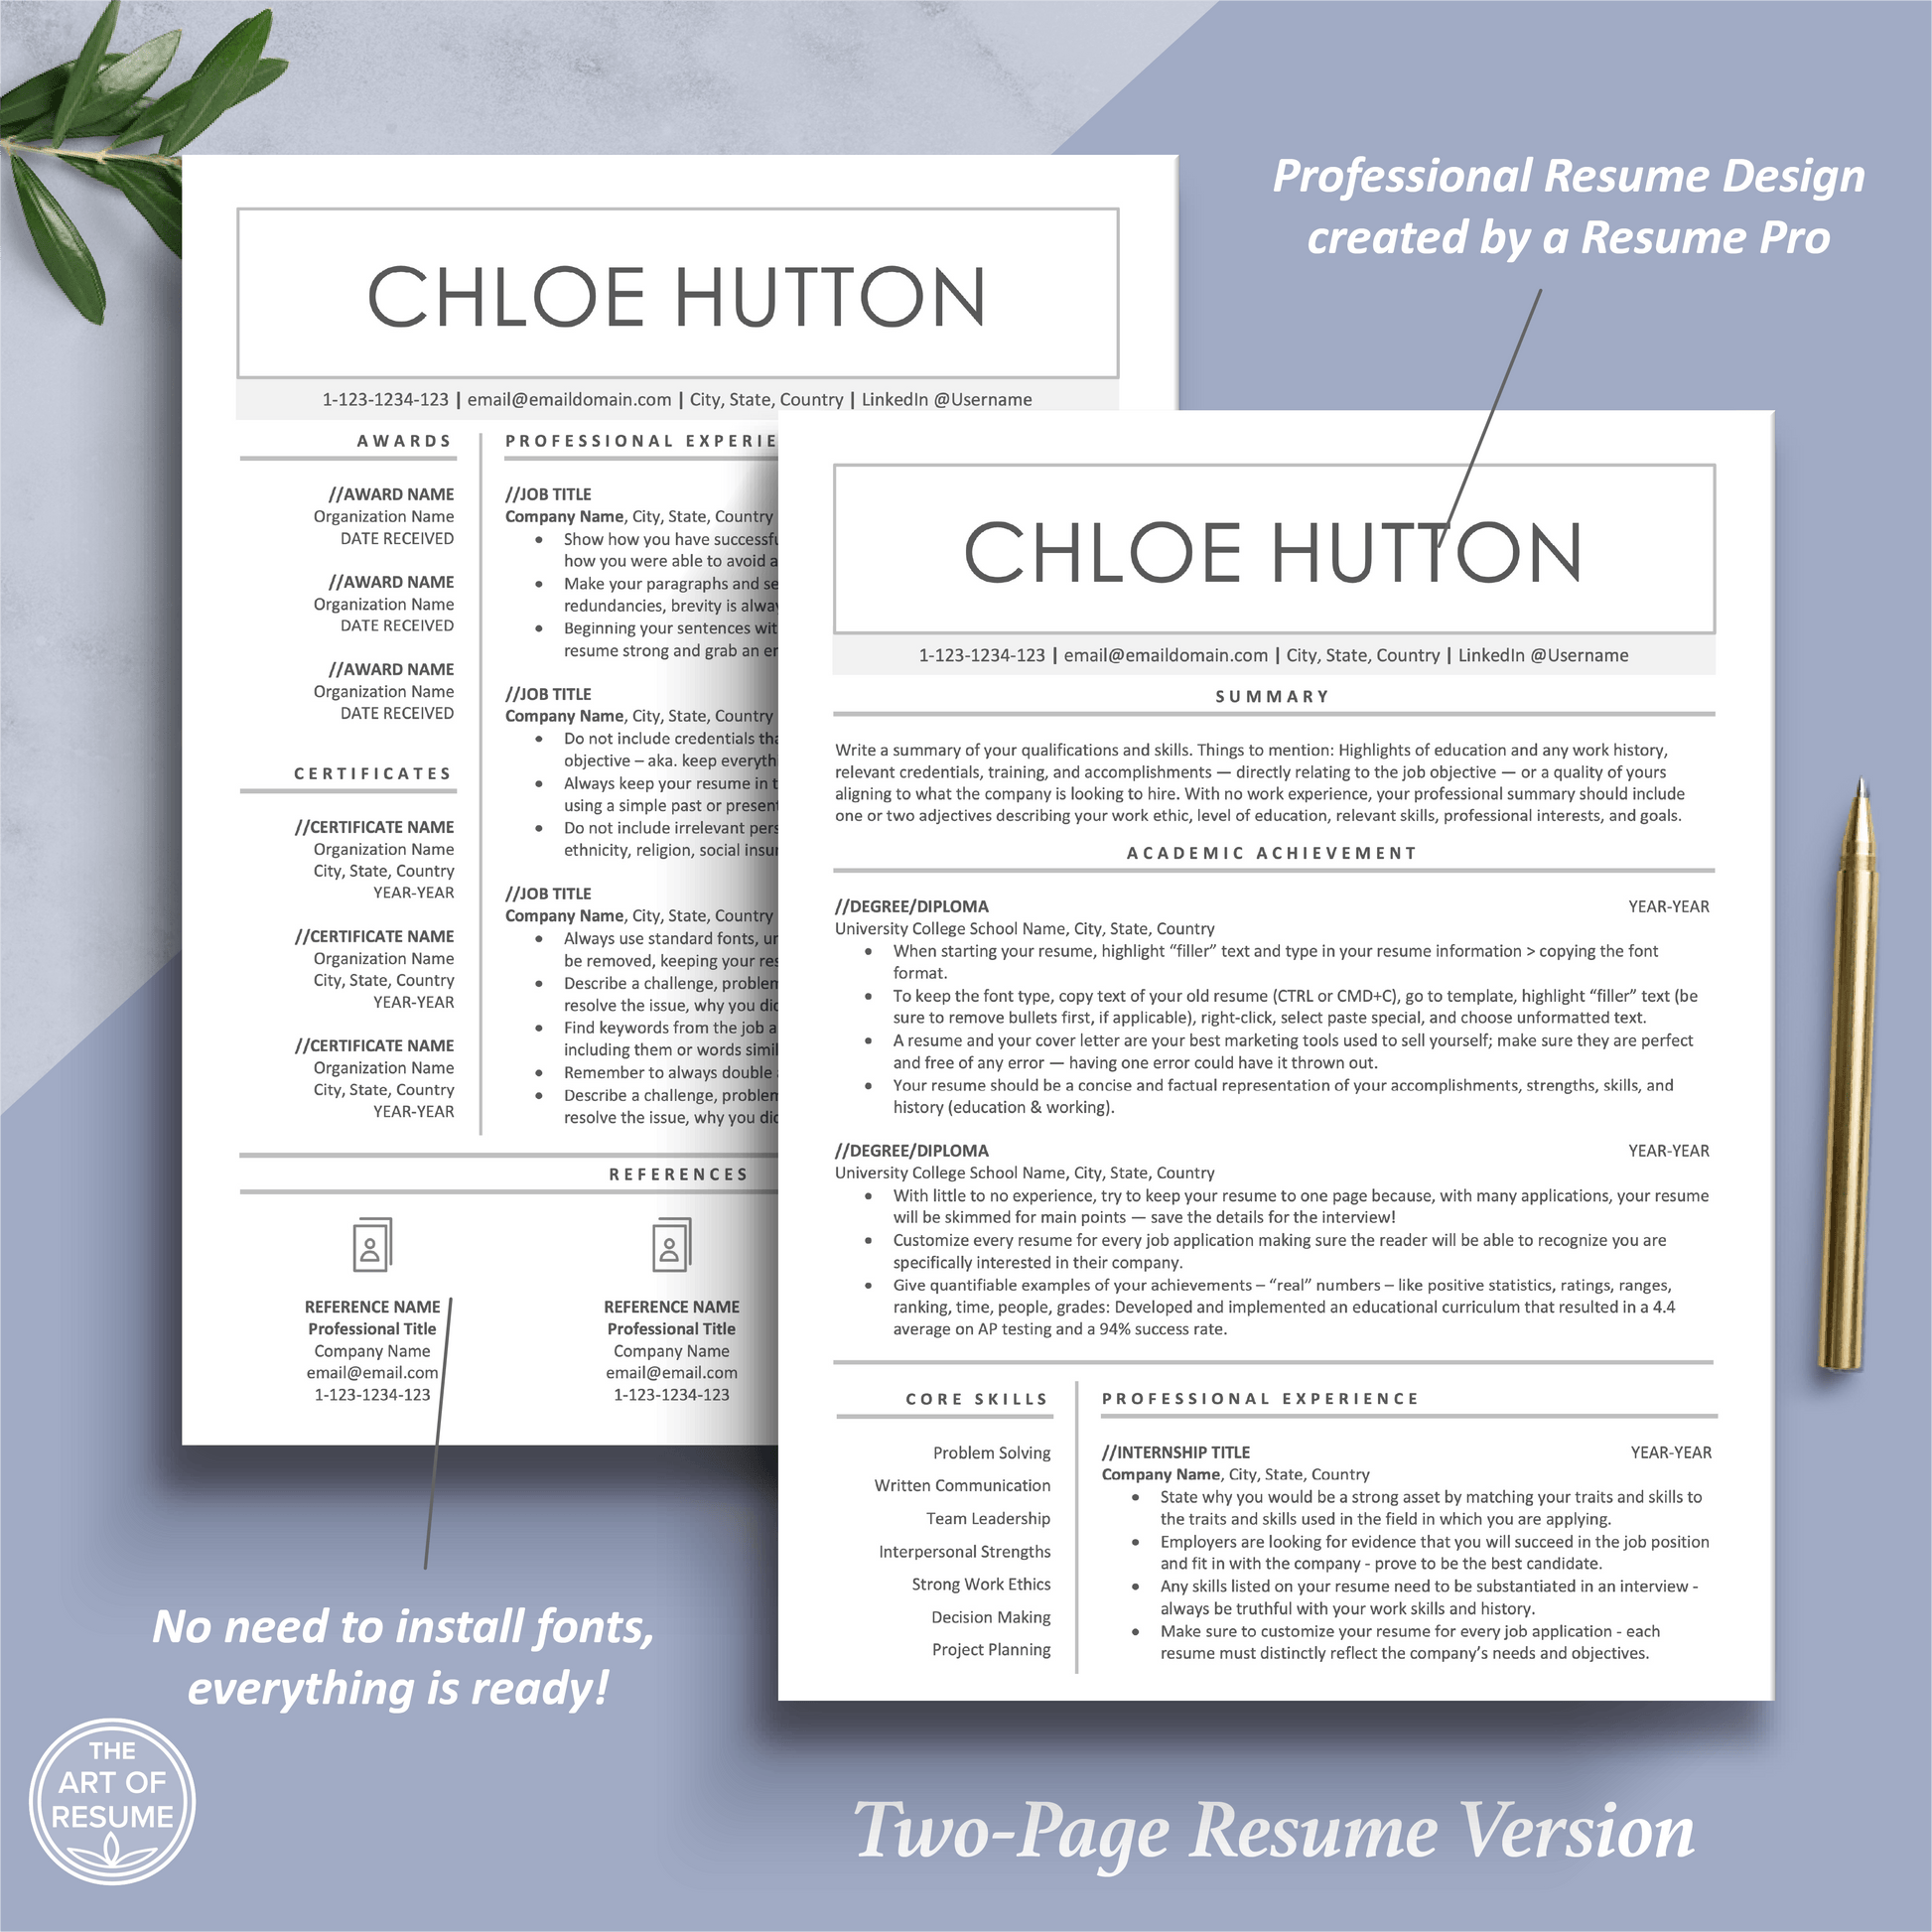 The Art of Resume Template | Two-Page Resume CV Format